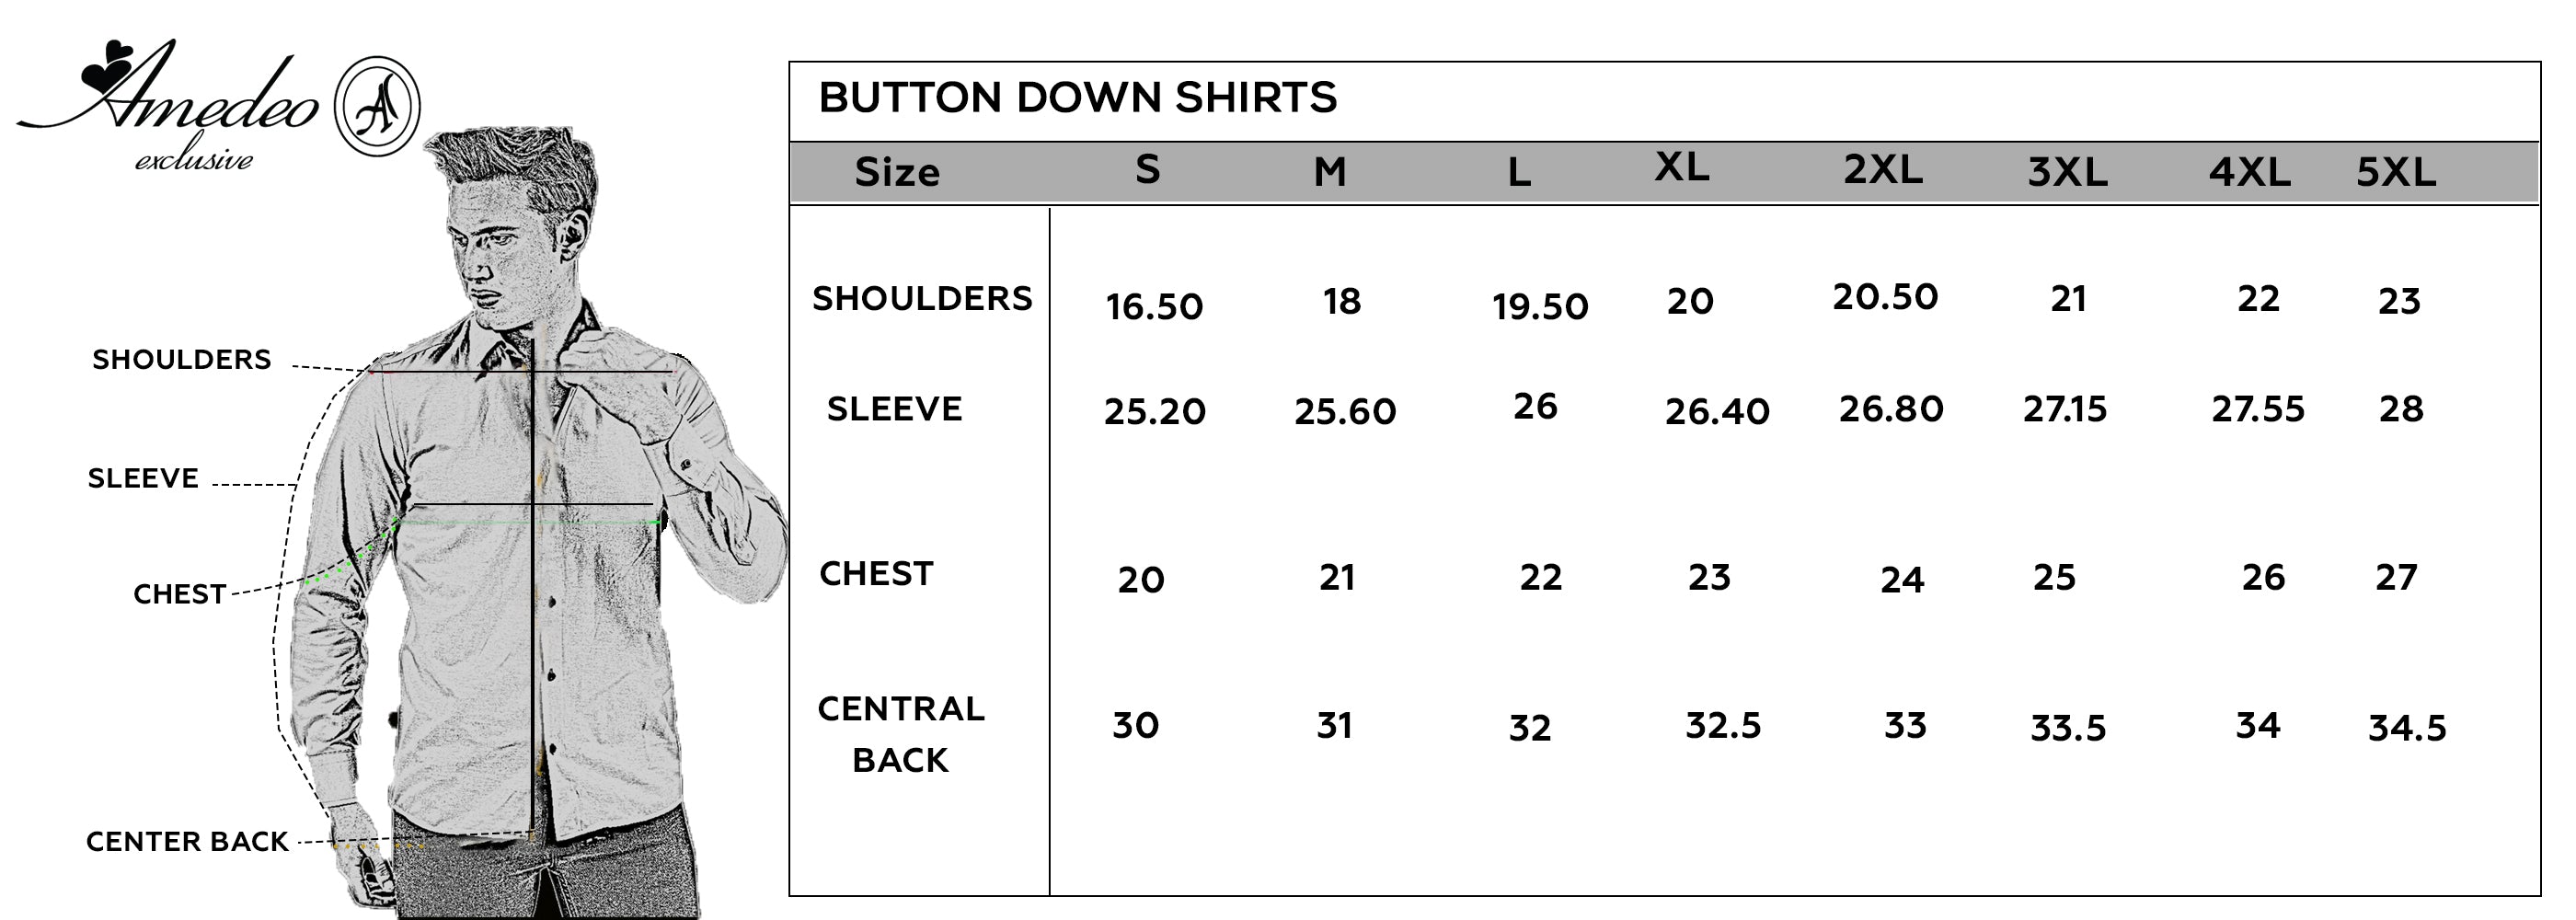 Black White Mens Slim Fit Designer French Cuff Shirt - Tailored Cotton Shirts For Work And Casual